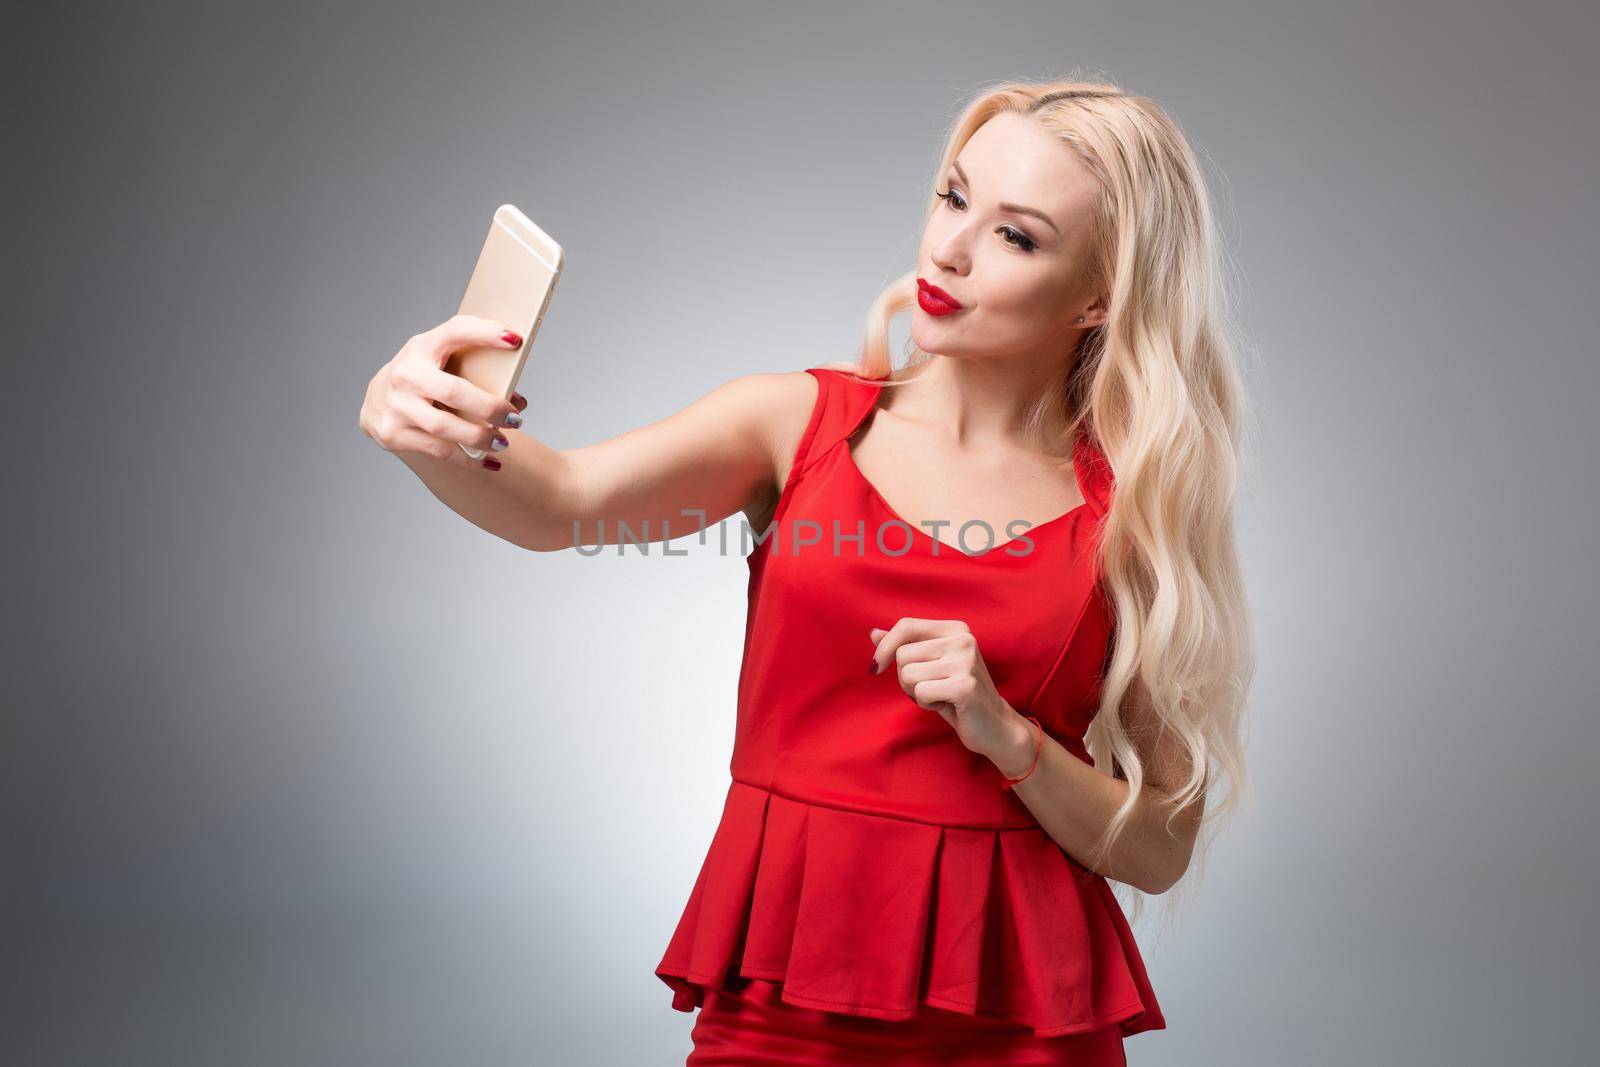 Portrait of a Beautiful successful blonde doing selfie in a red dress on a light background